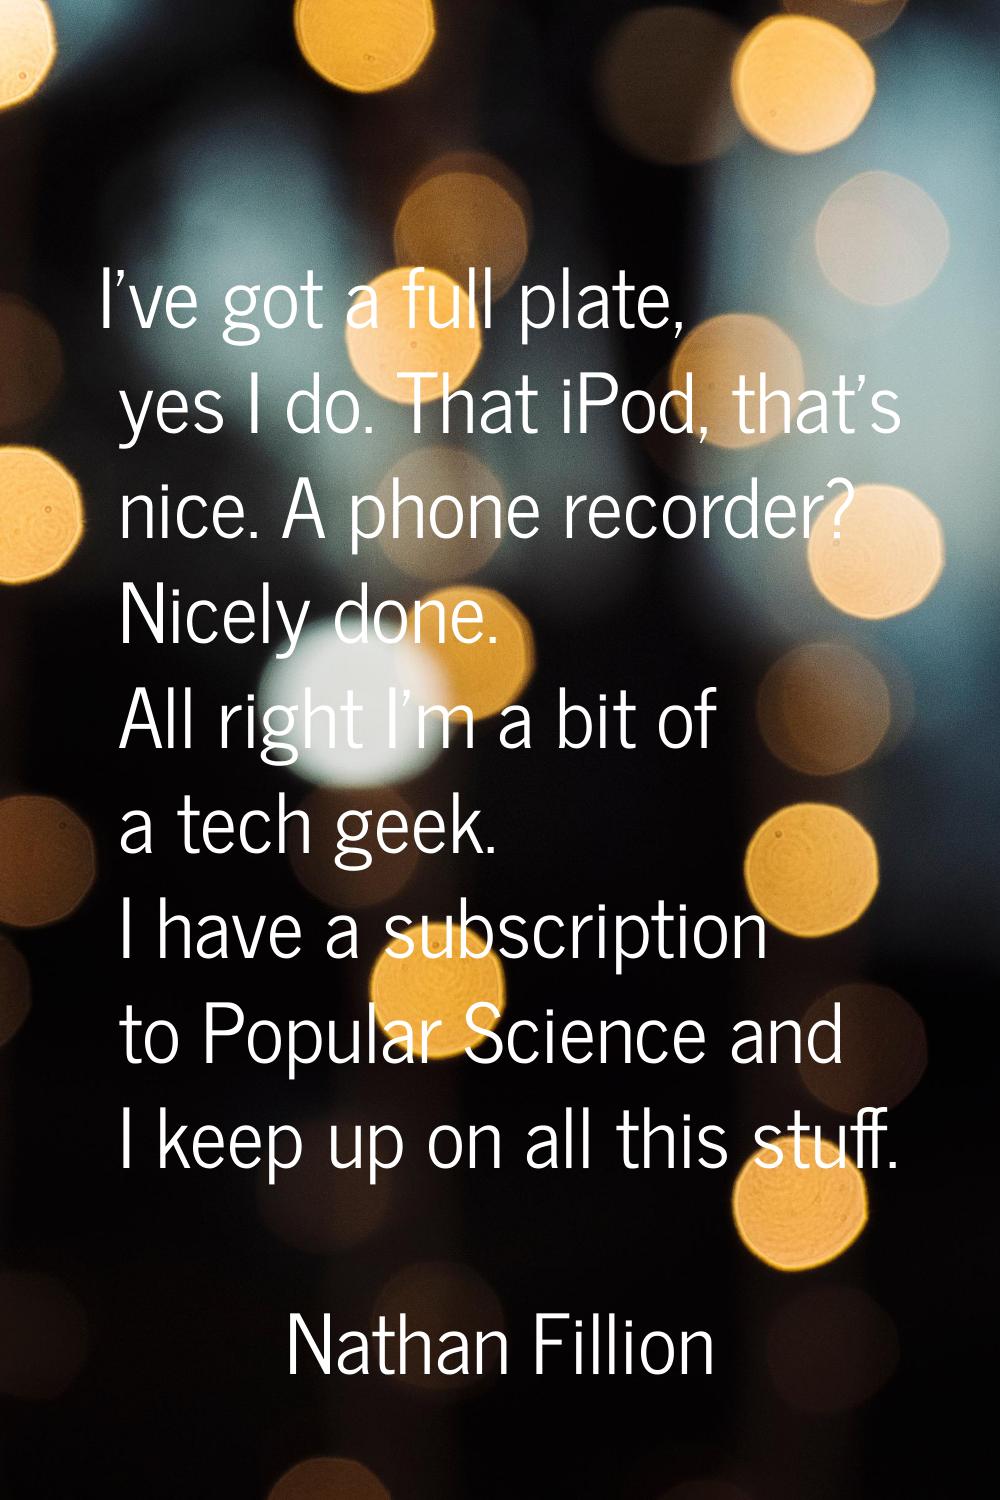 I've got a full plate, yes I do. That iPod, that's nice. A phone recorder? Nicely done. All right I